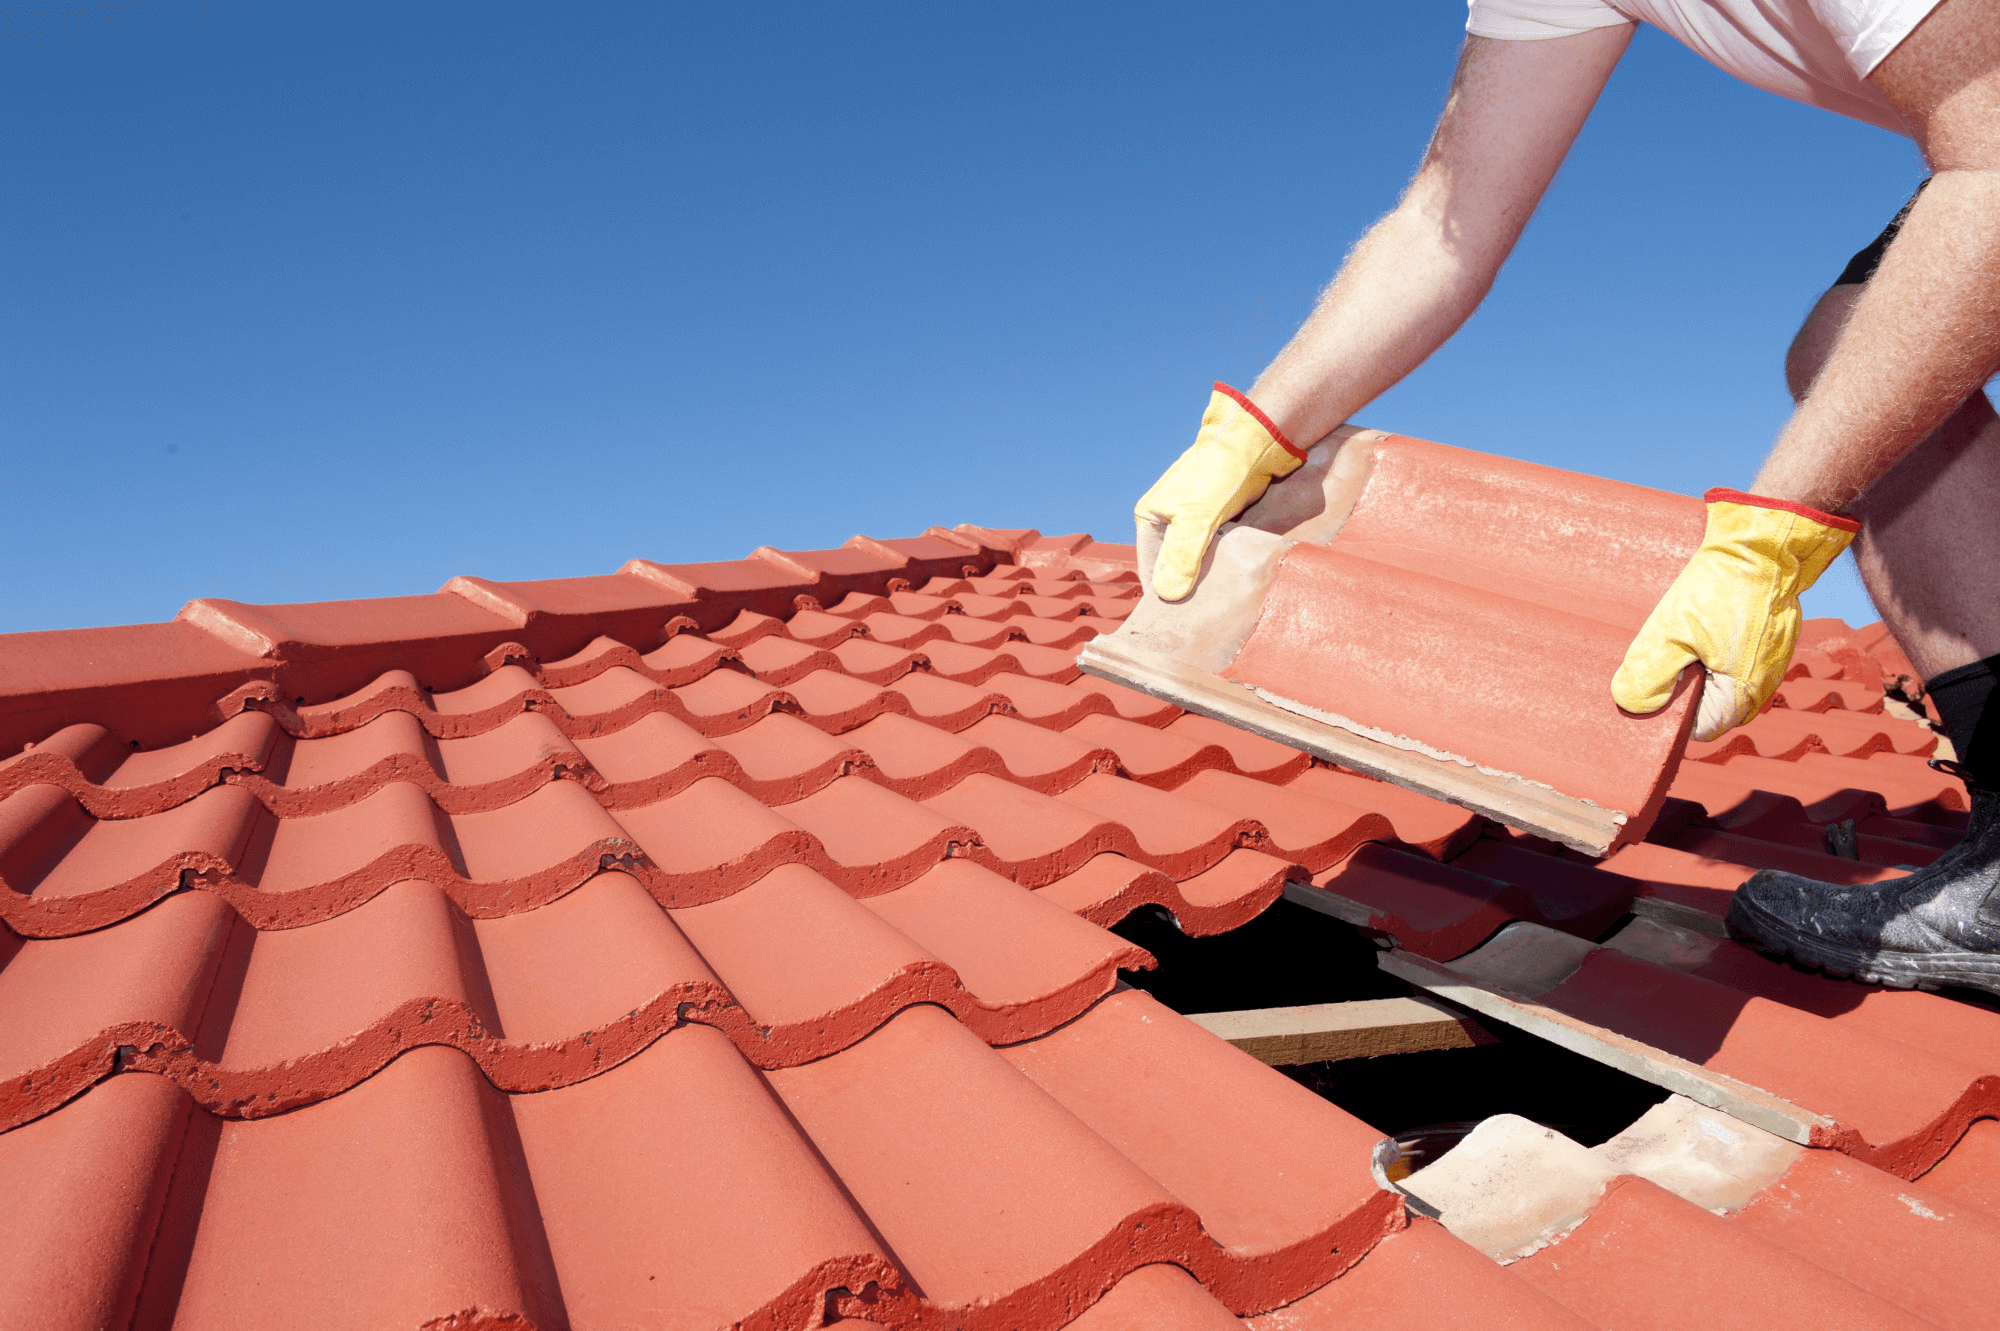 Steps to Finding the Perfect Roofer